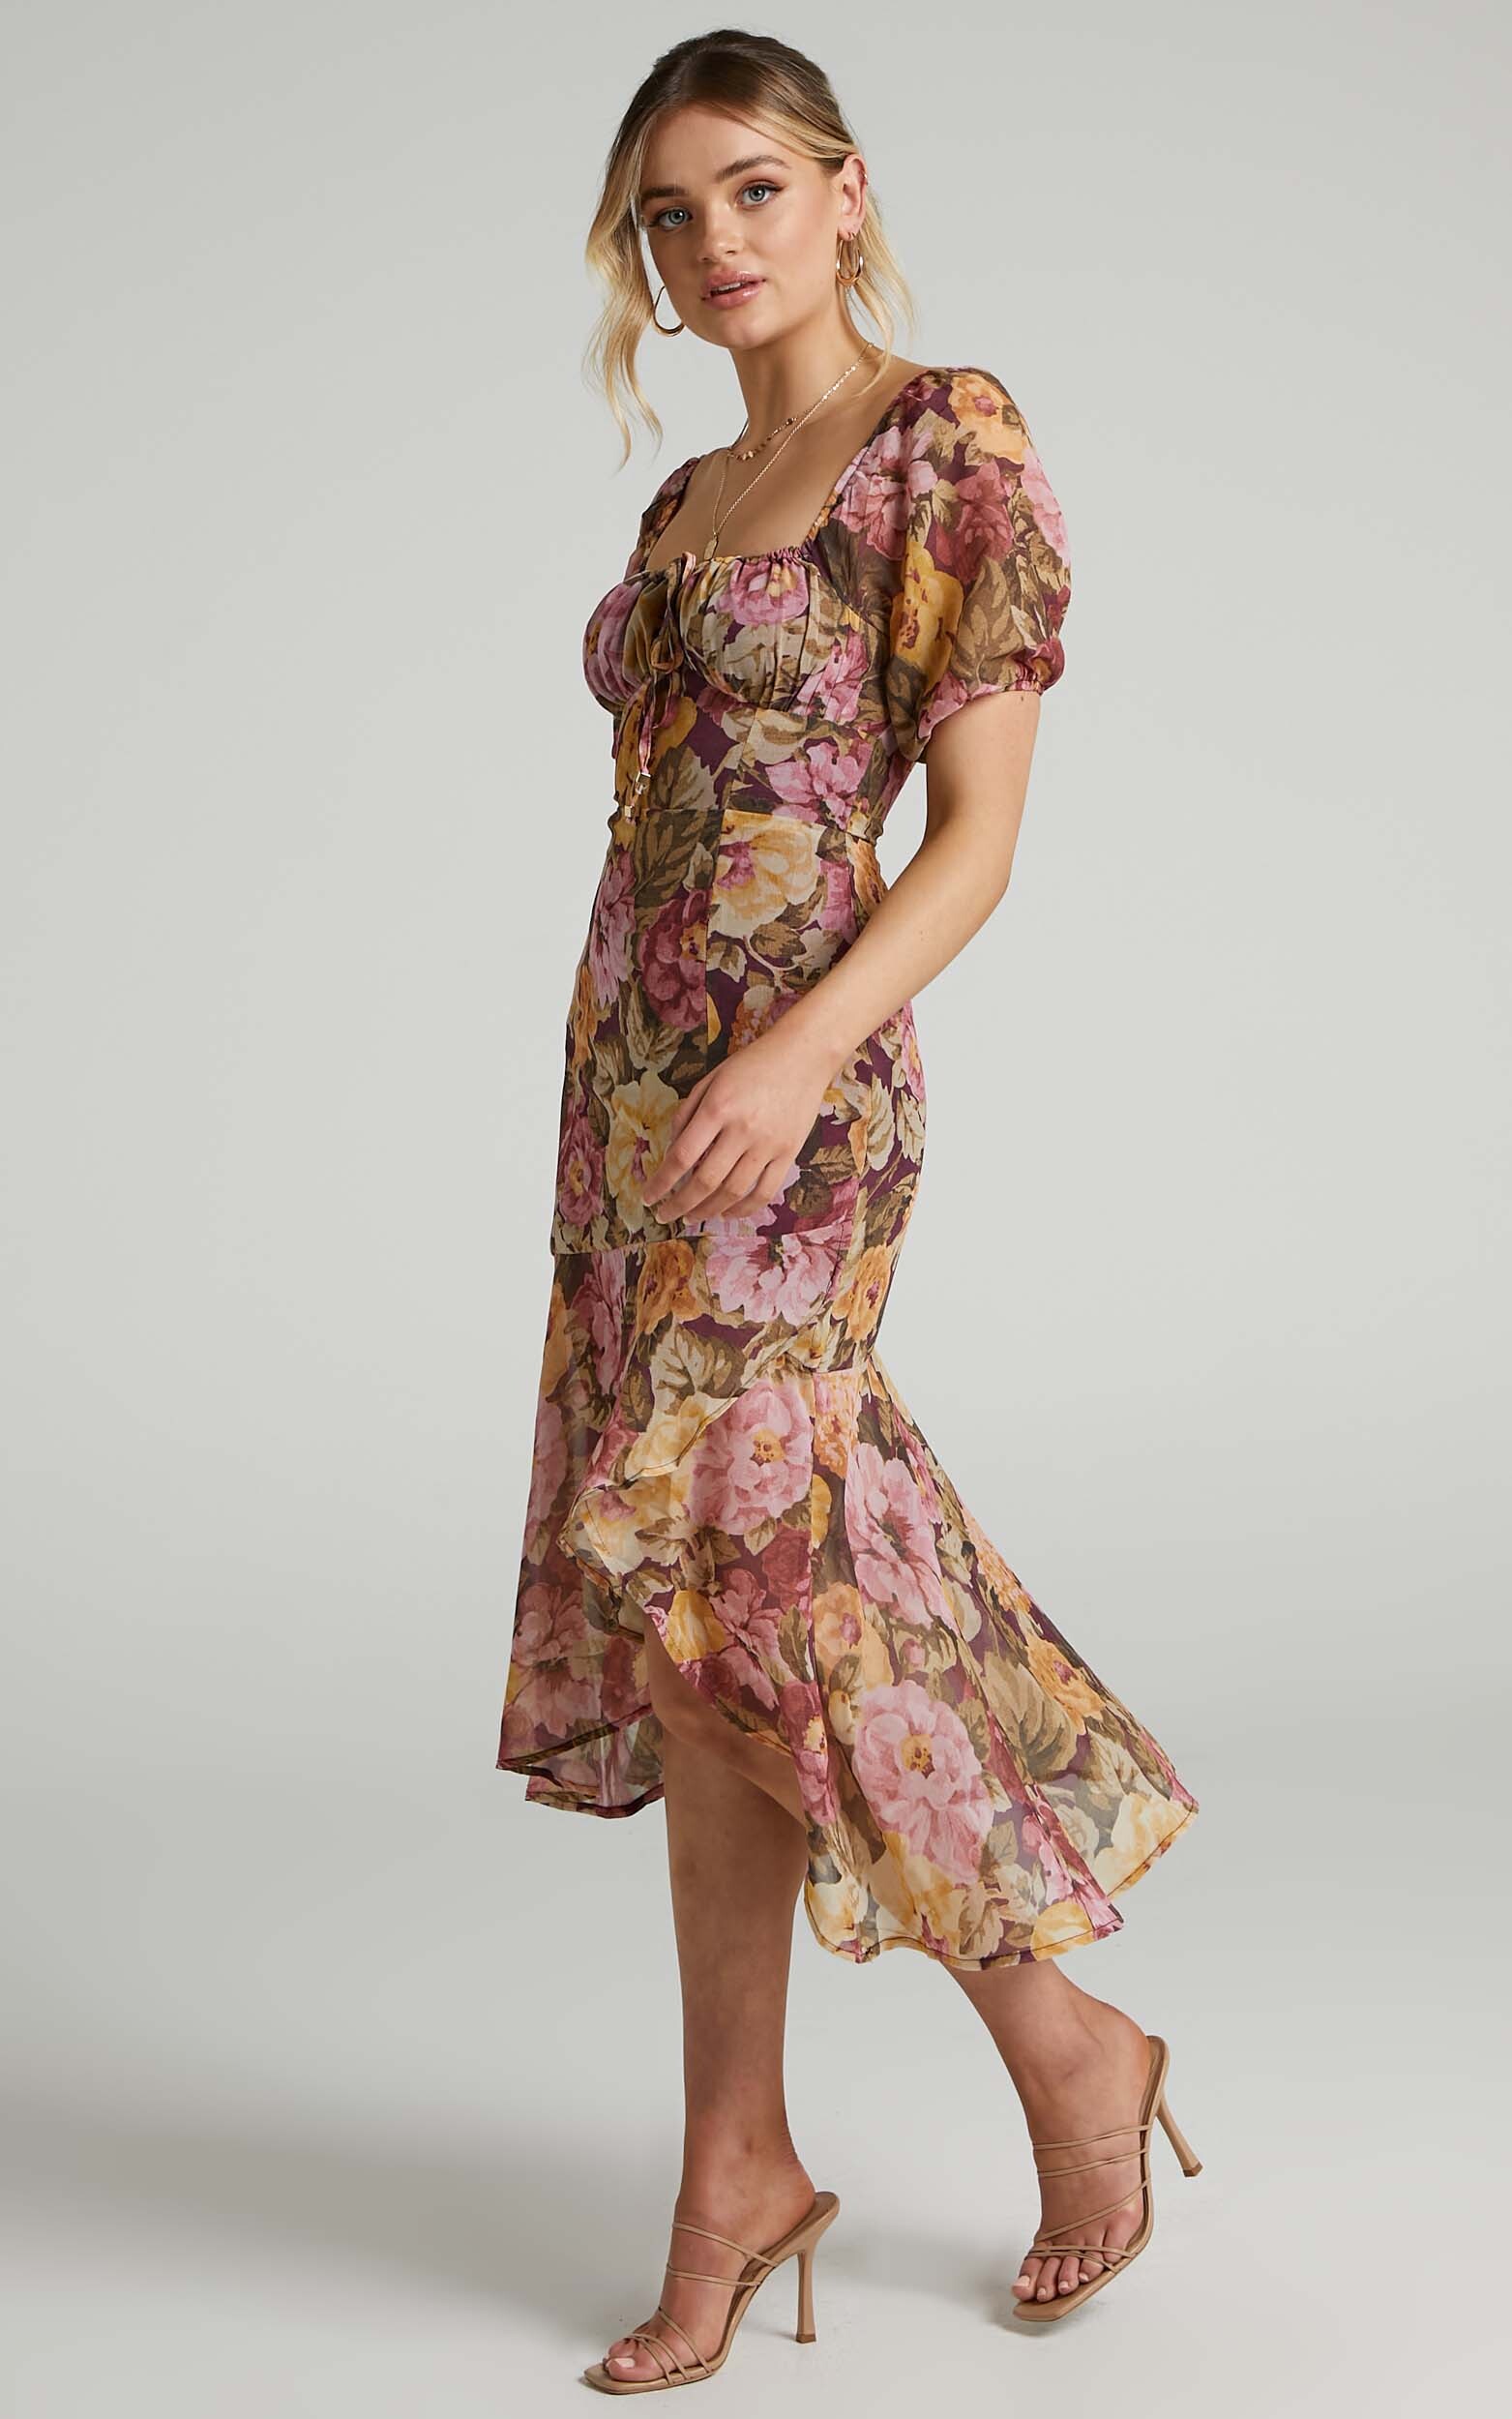 Jasalina Puff Sleeve Midi Dress in Classic Floral - 06, PNK3, hi-res image number null